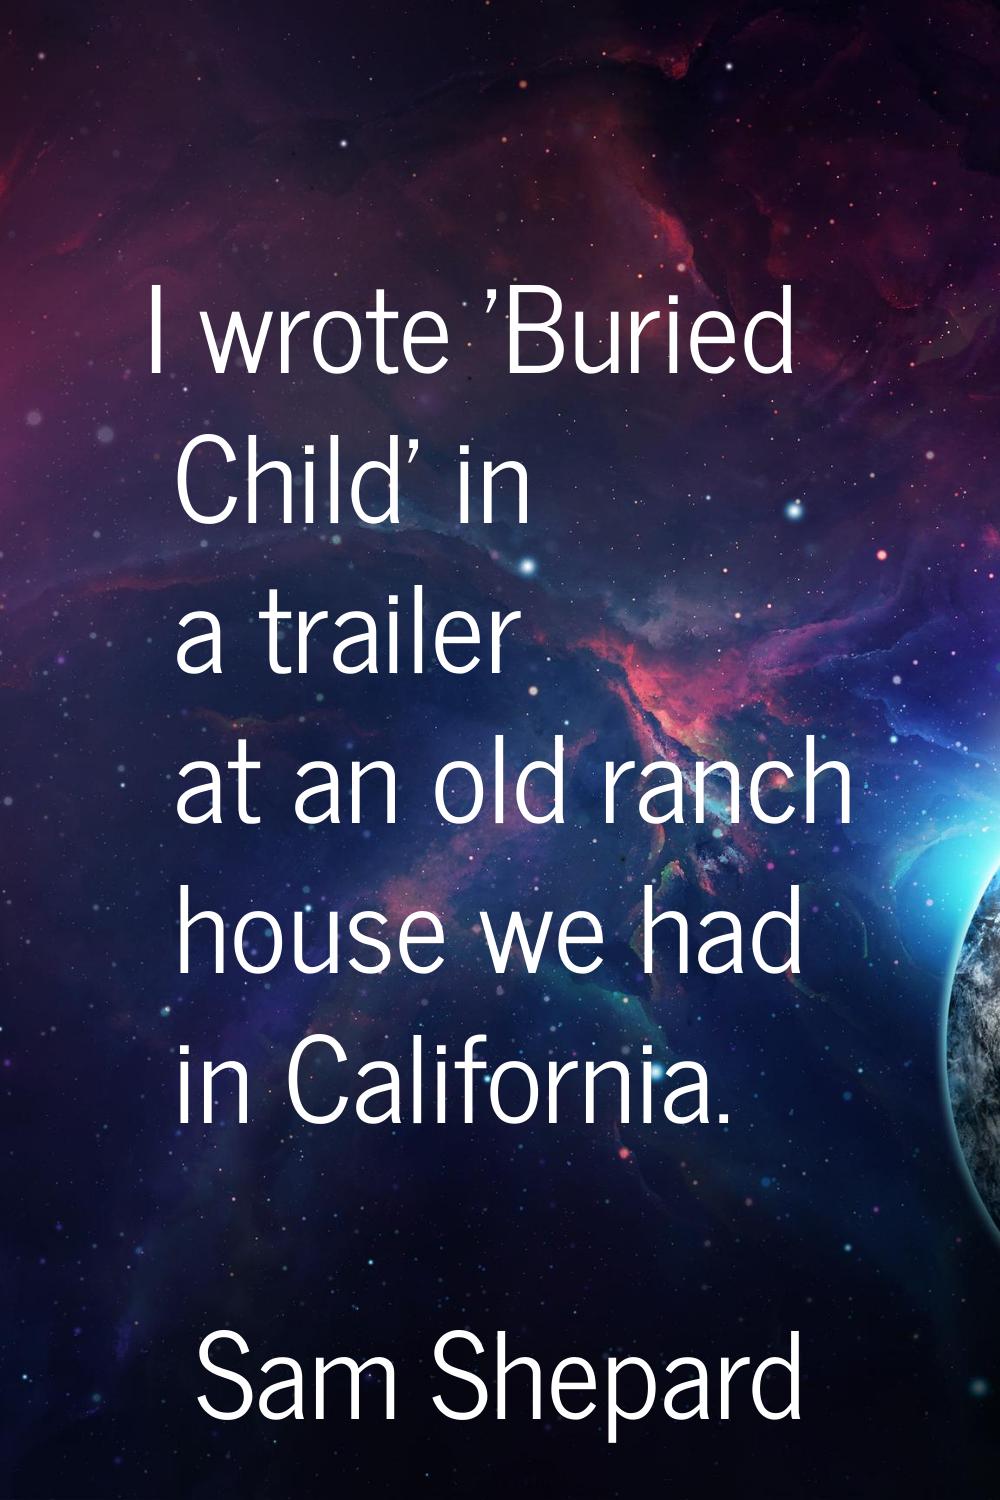 I wrote 'Buried Child' in a trailer at an old ranch house we had in California.